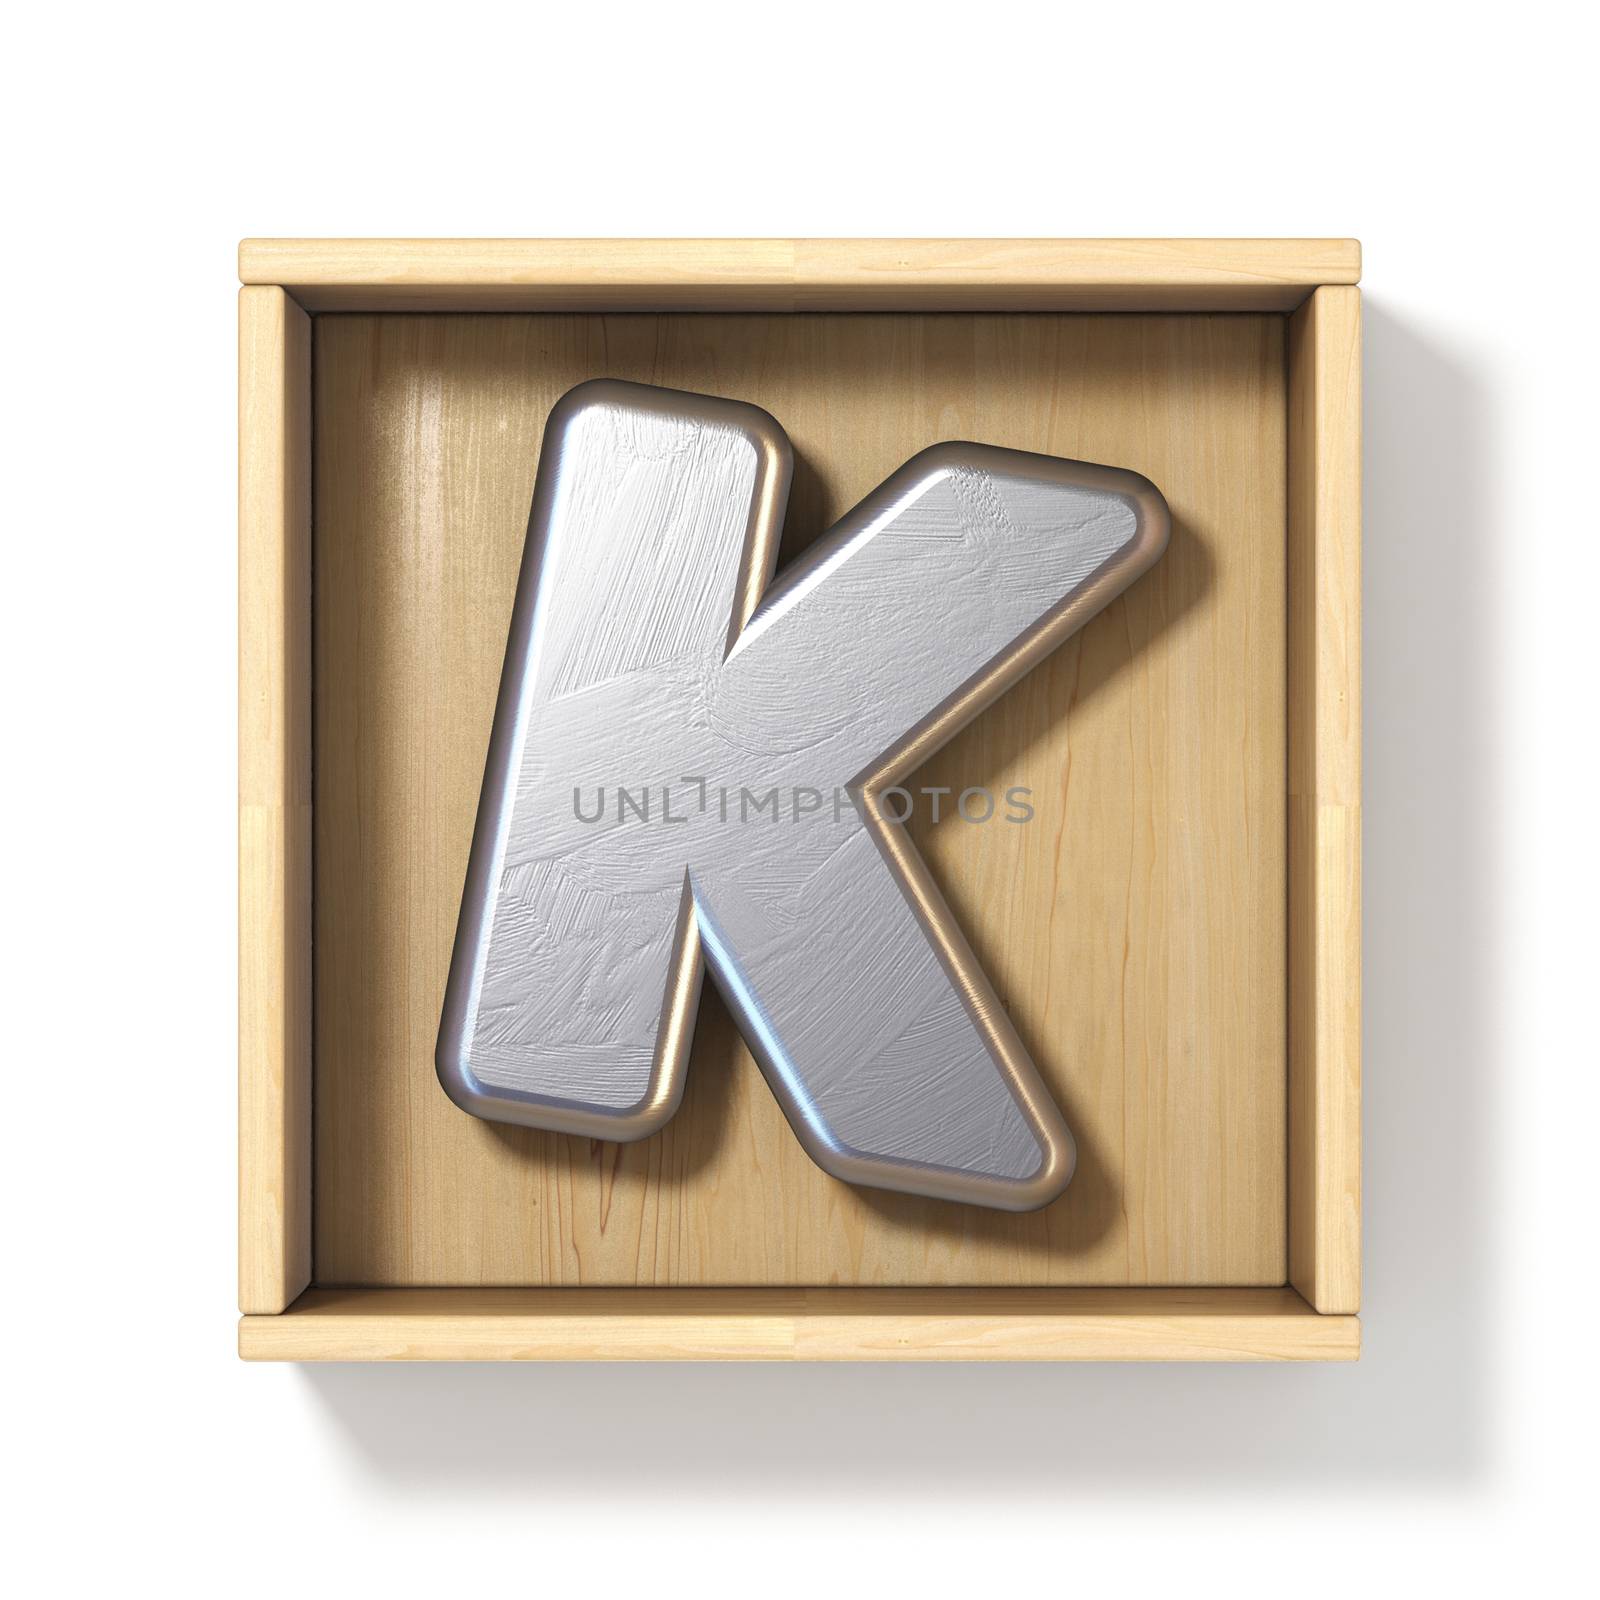 Silver metal letter K in wooden box 3D render illustration isolated on white background